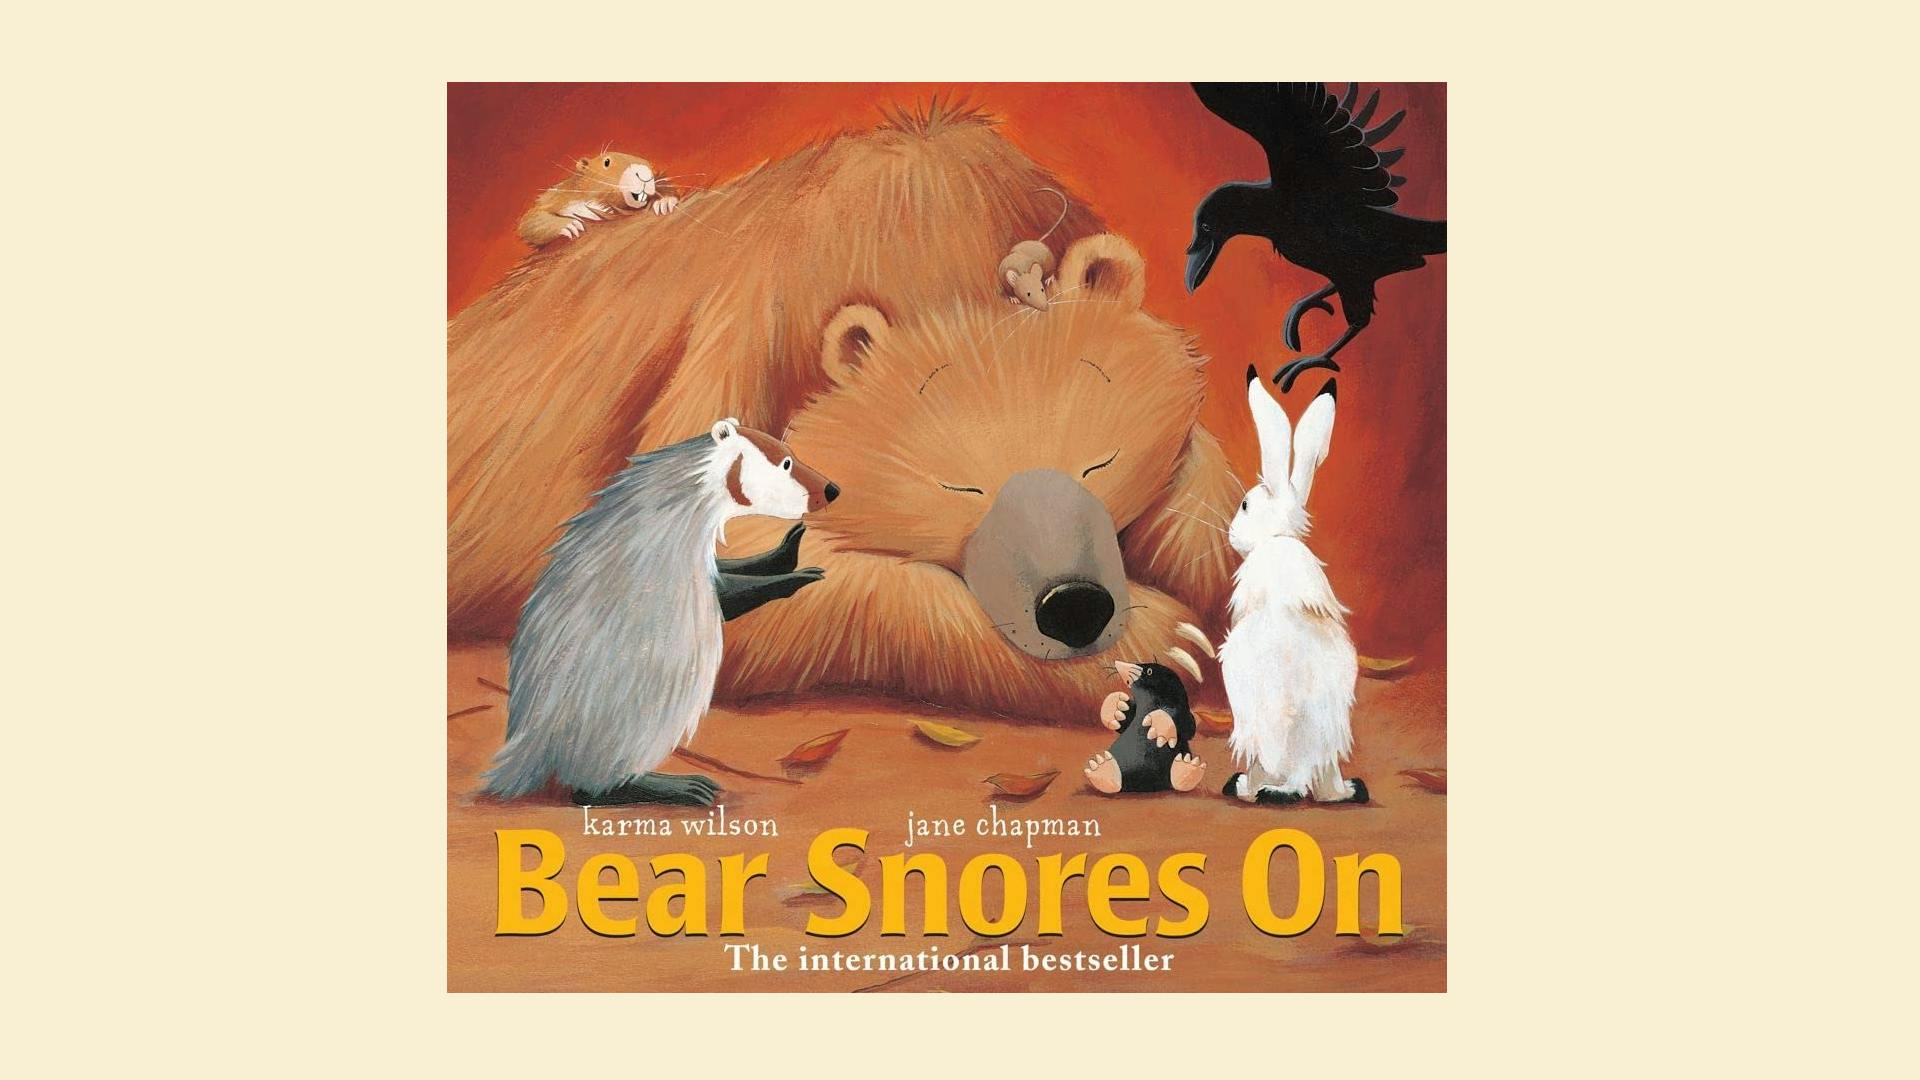 A cozy story about a hibernating bear who’s woken up by a bunch of party animals